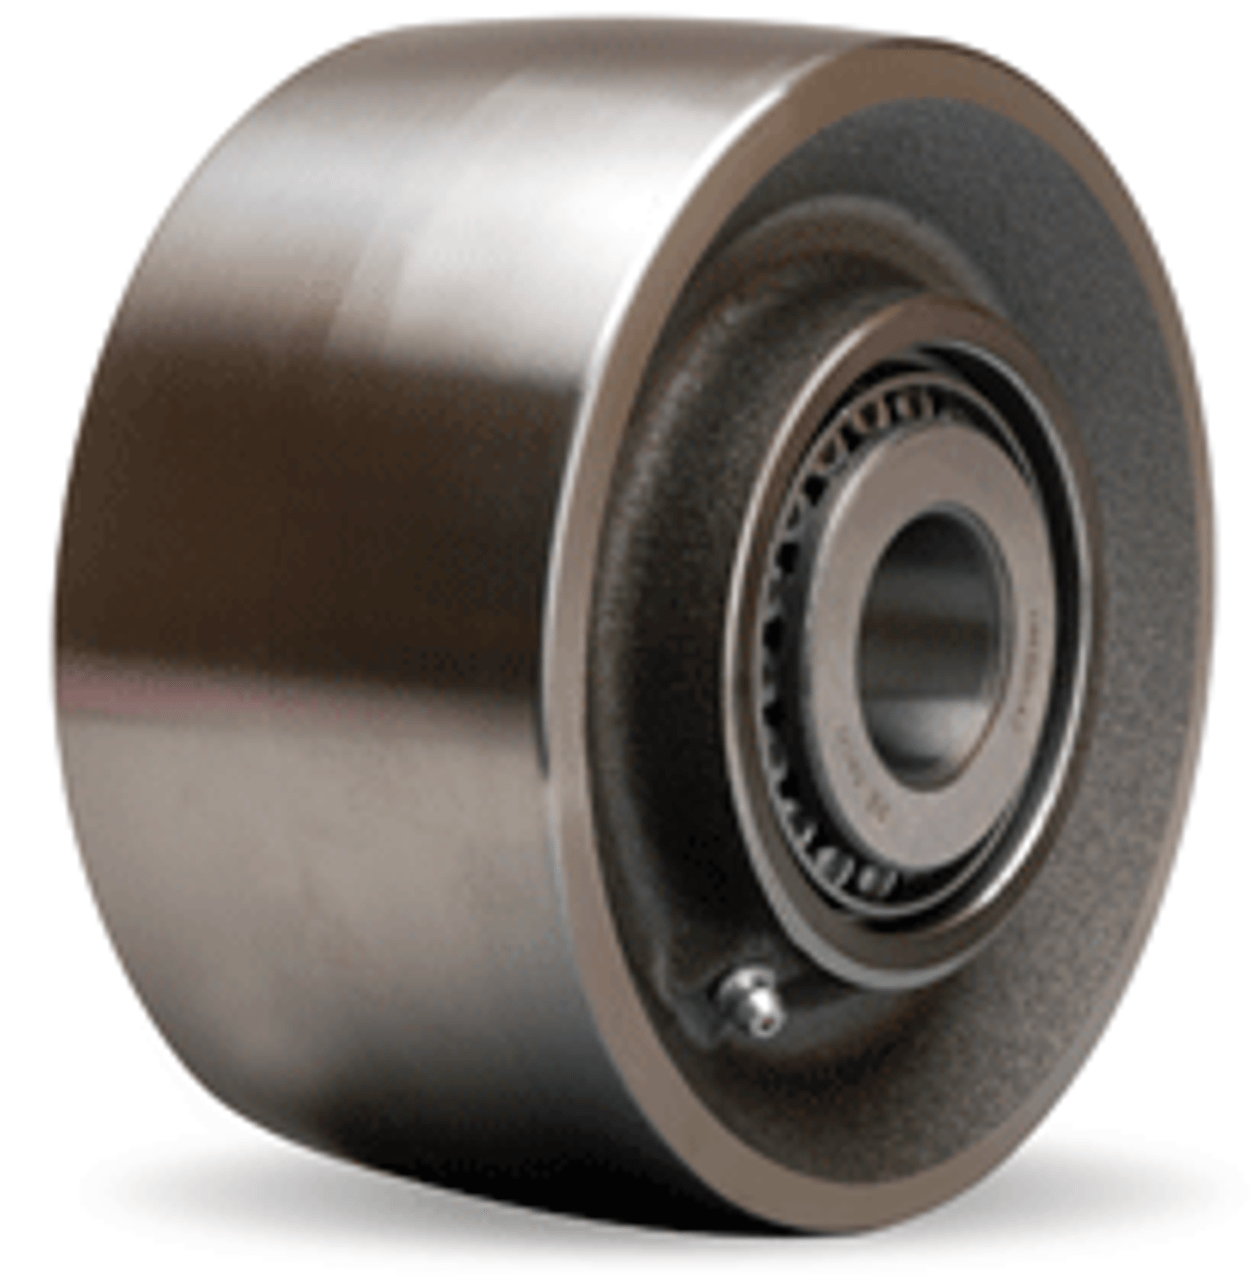 Picture shows wheel with tapered bearing